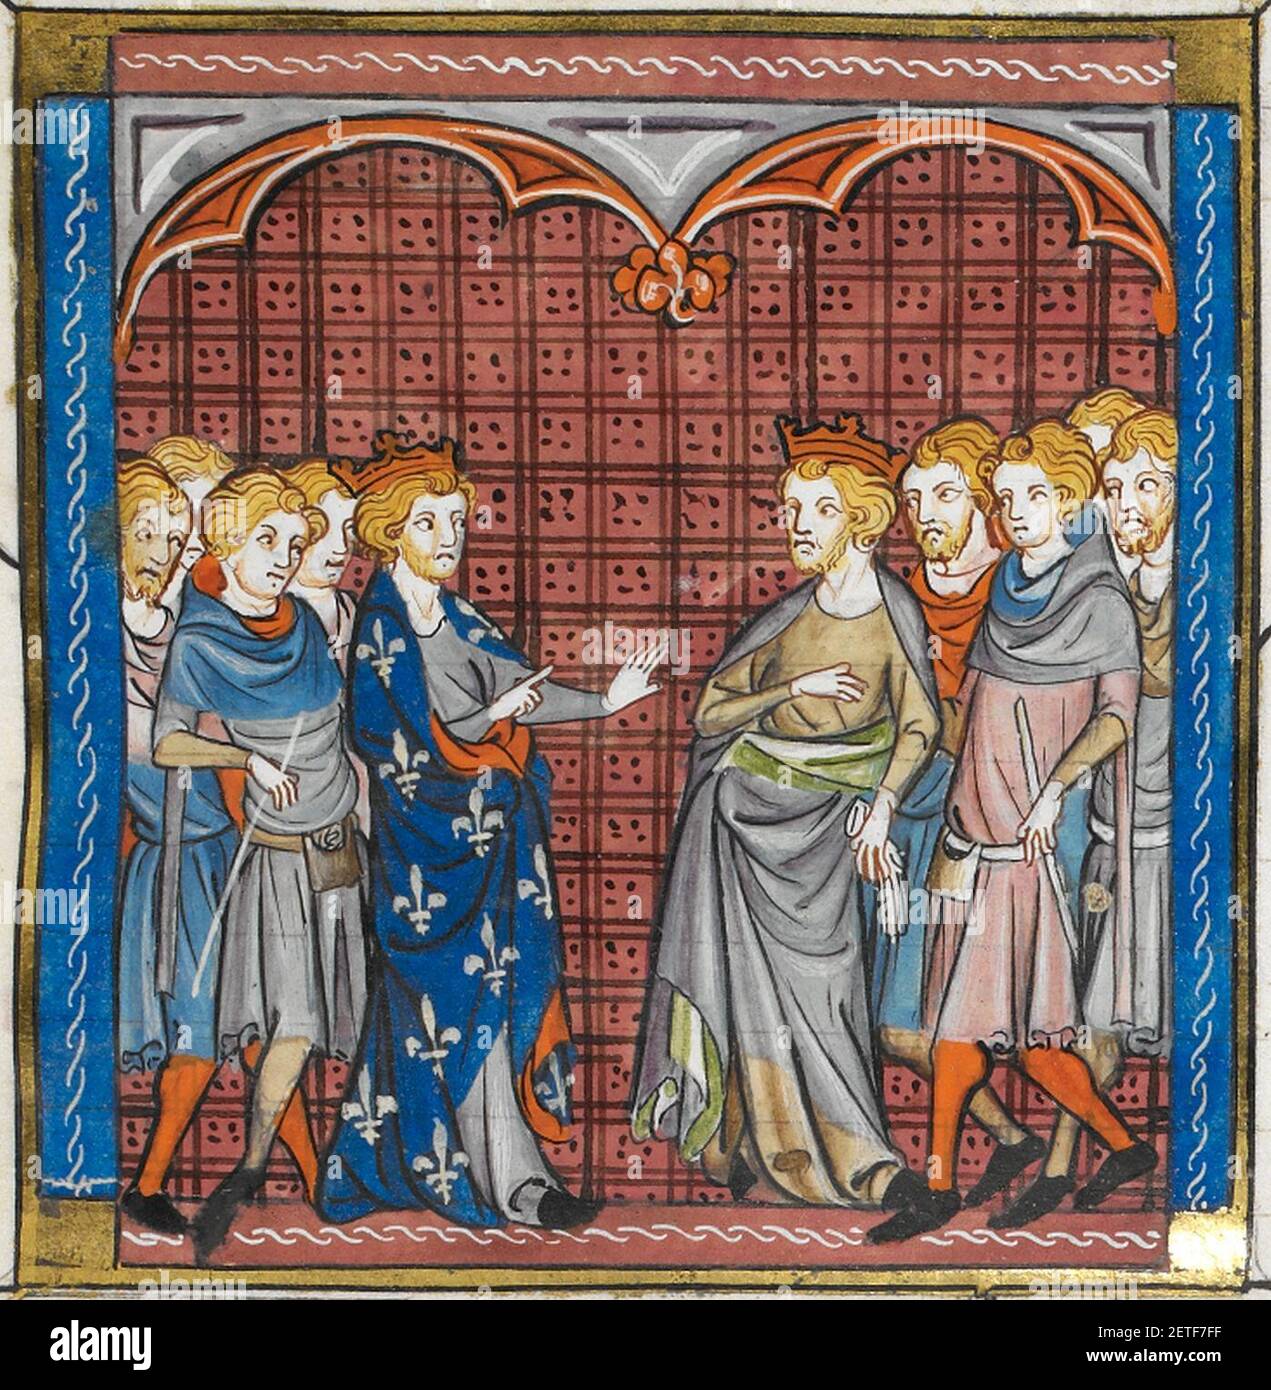 Philip II and Tancred meeting in Messina - MS 16 G vi f350r (detail). Stock Photo